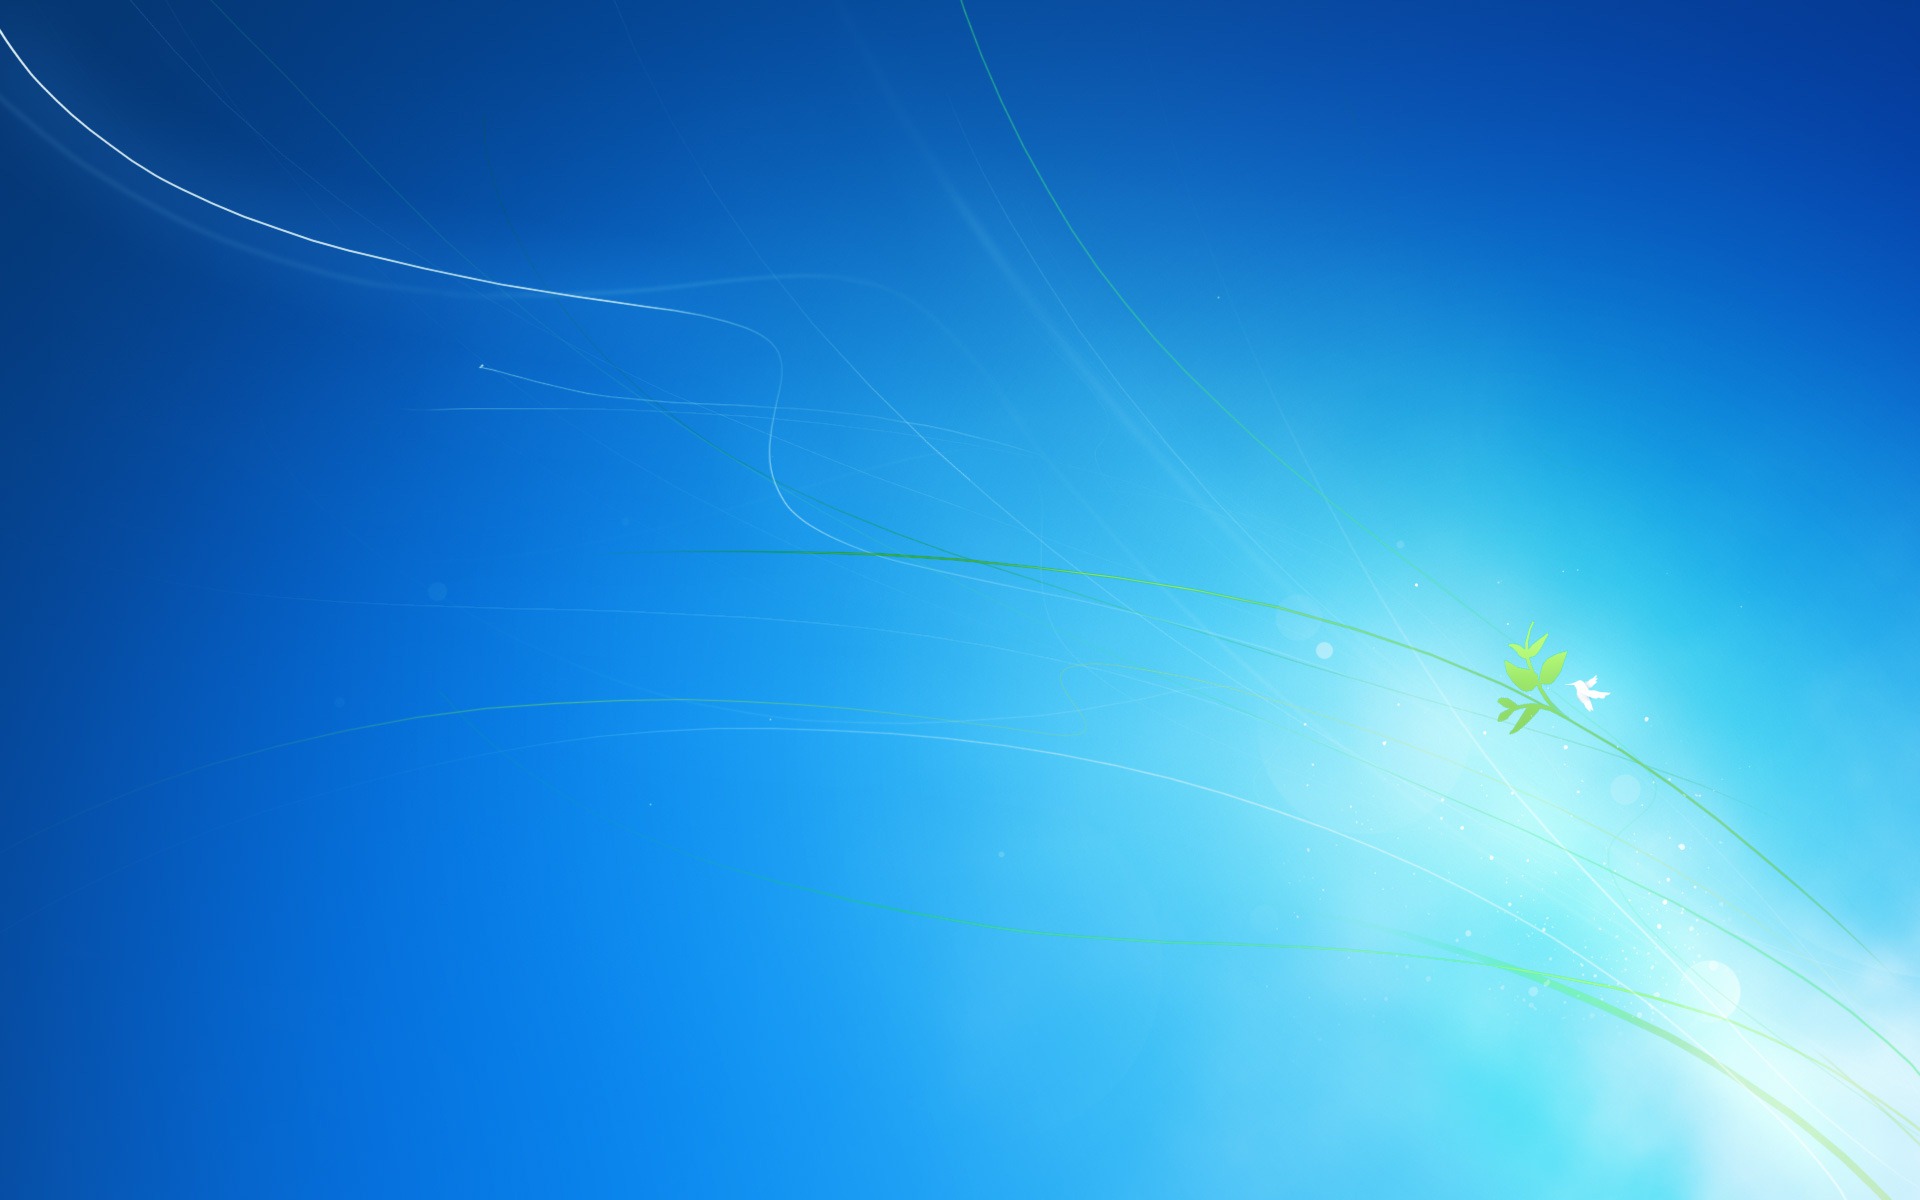 Windows 7 Images Windows 7 Logon HD Wallpaper And Background